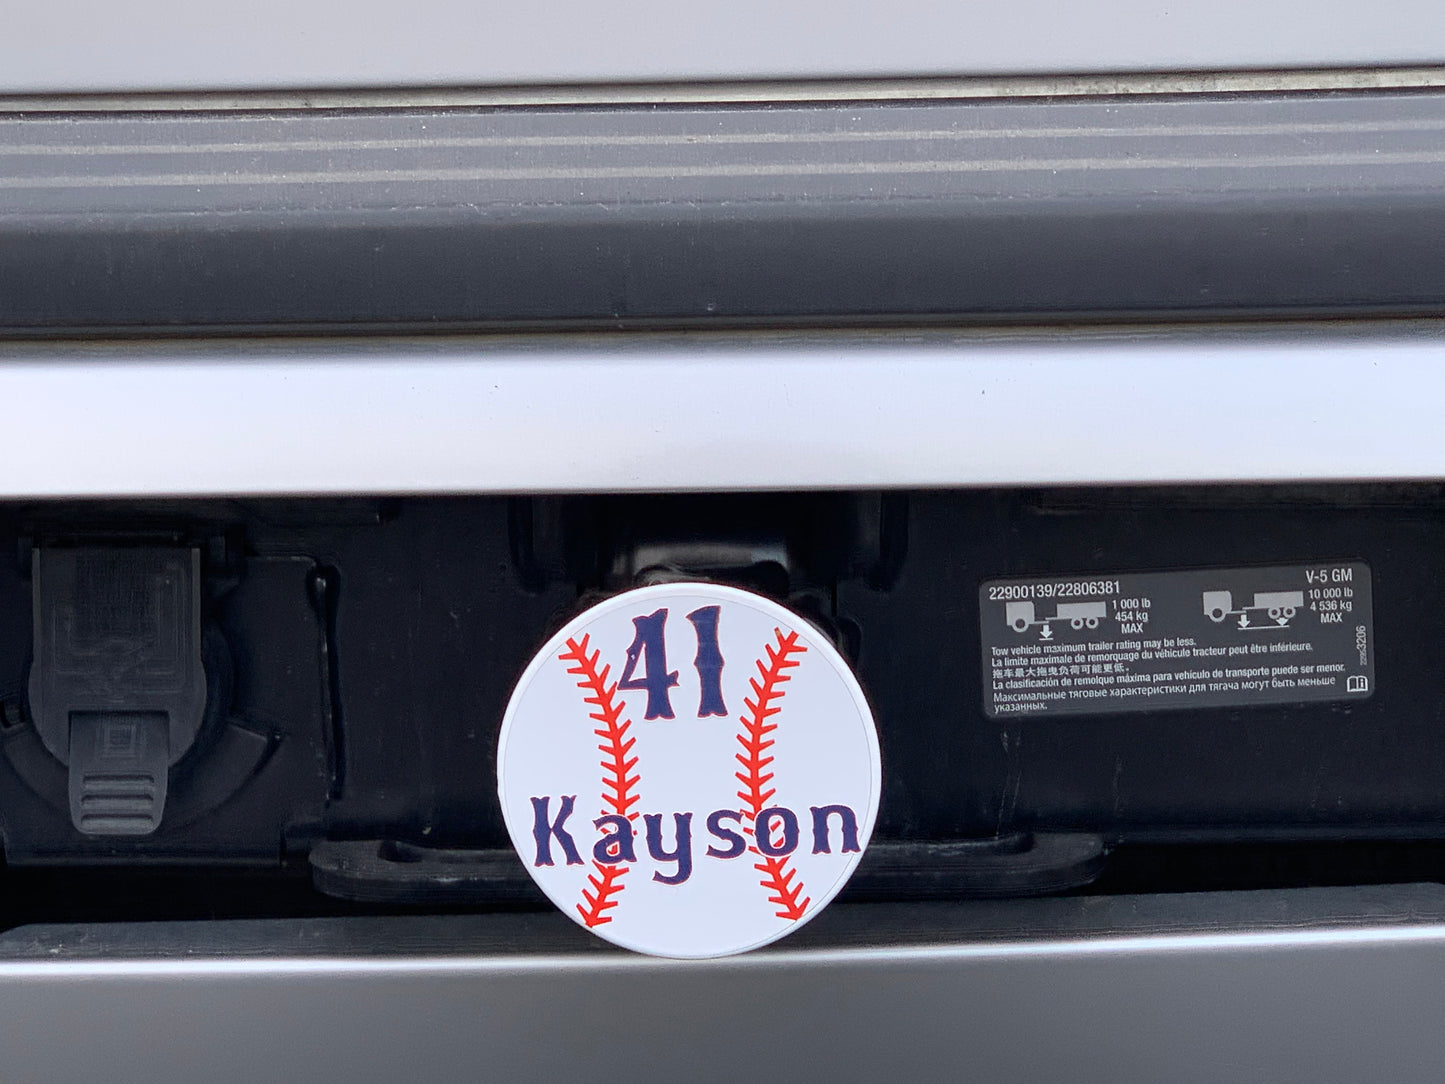 Custom Baseball Receiver Hitch Cover- With name and player number.